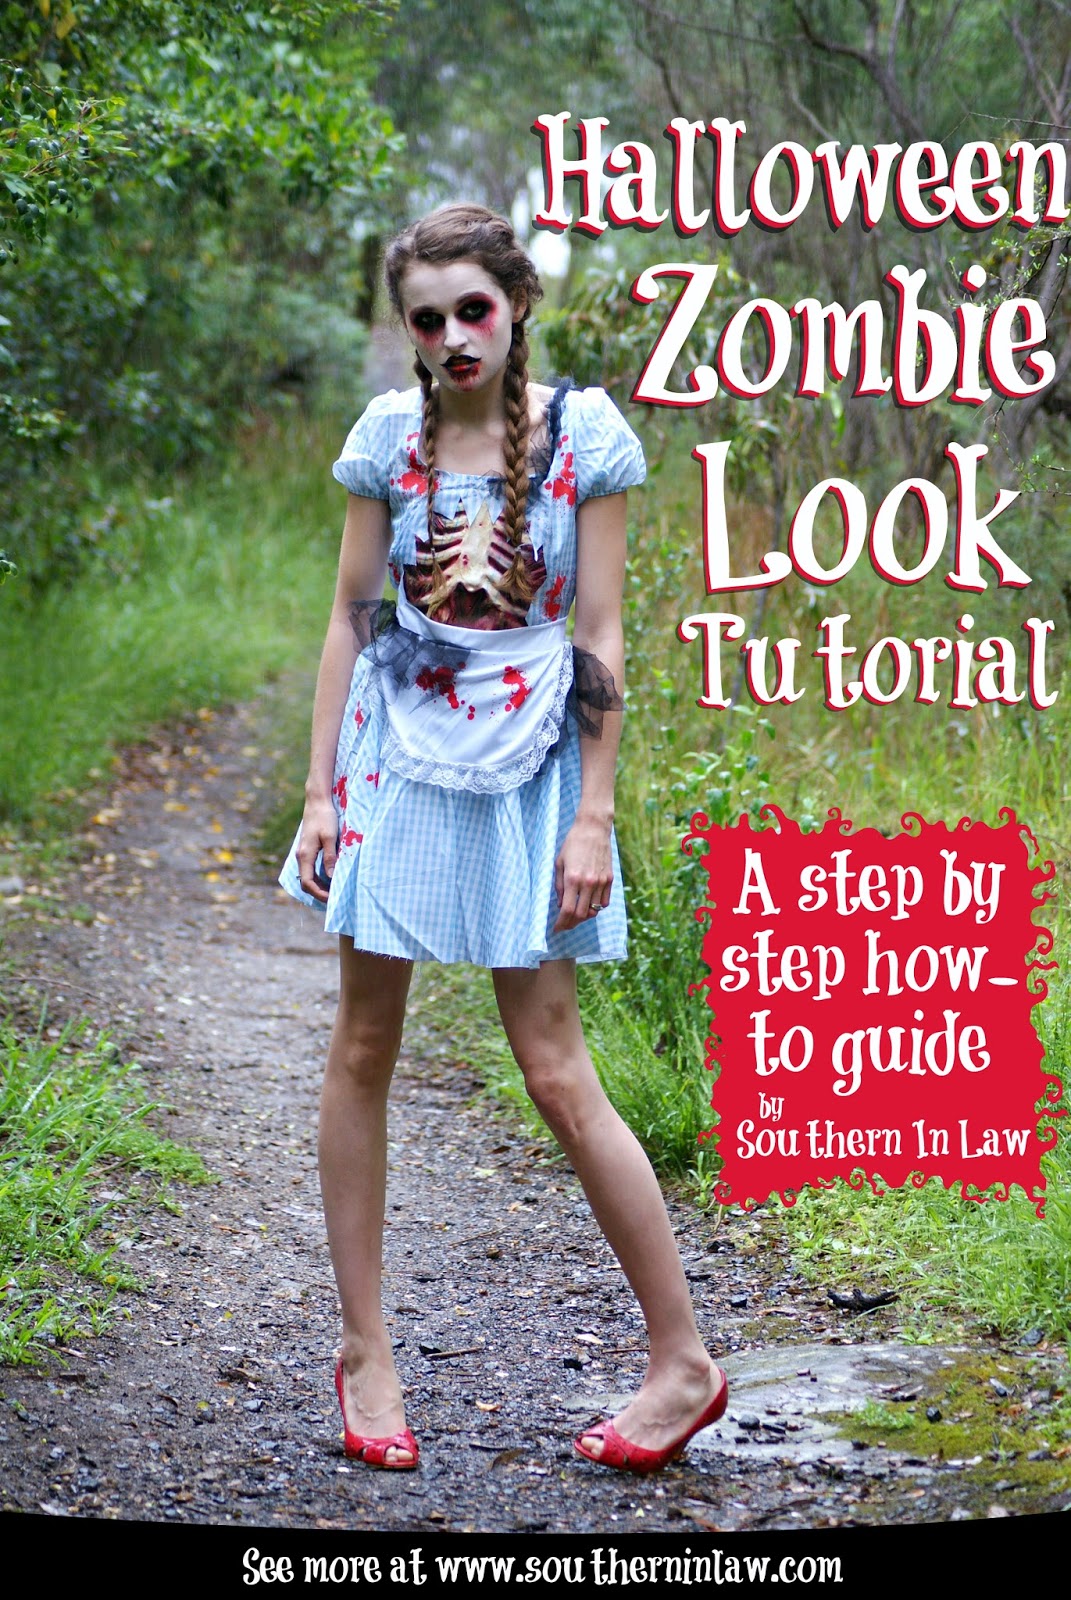 Southern In Law Step By Step Halloween Zombie Look Tutorial